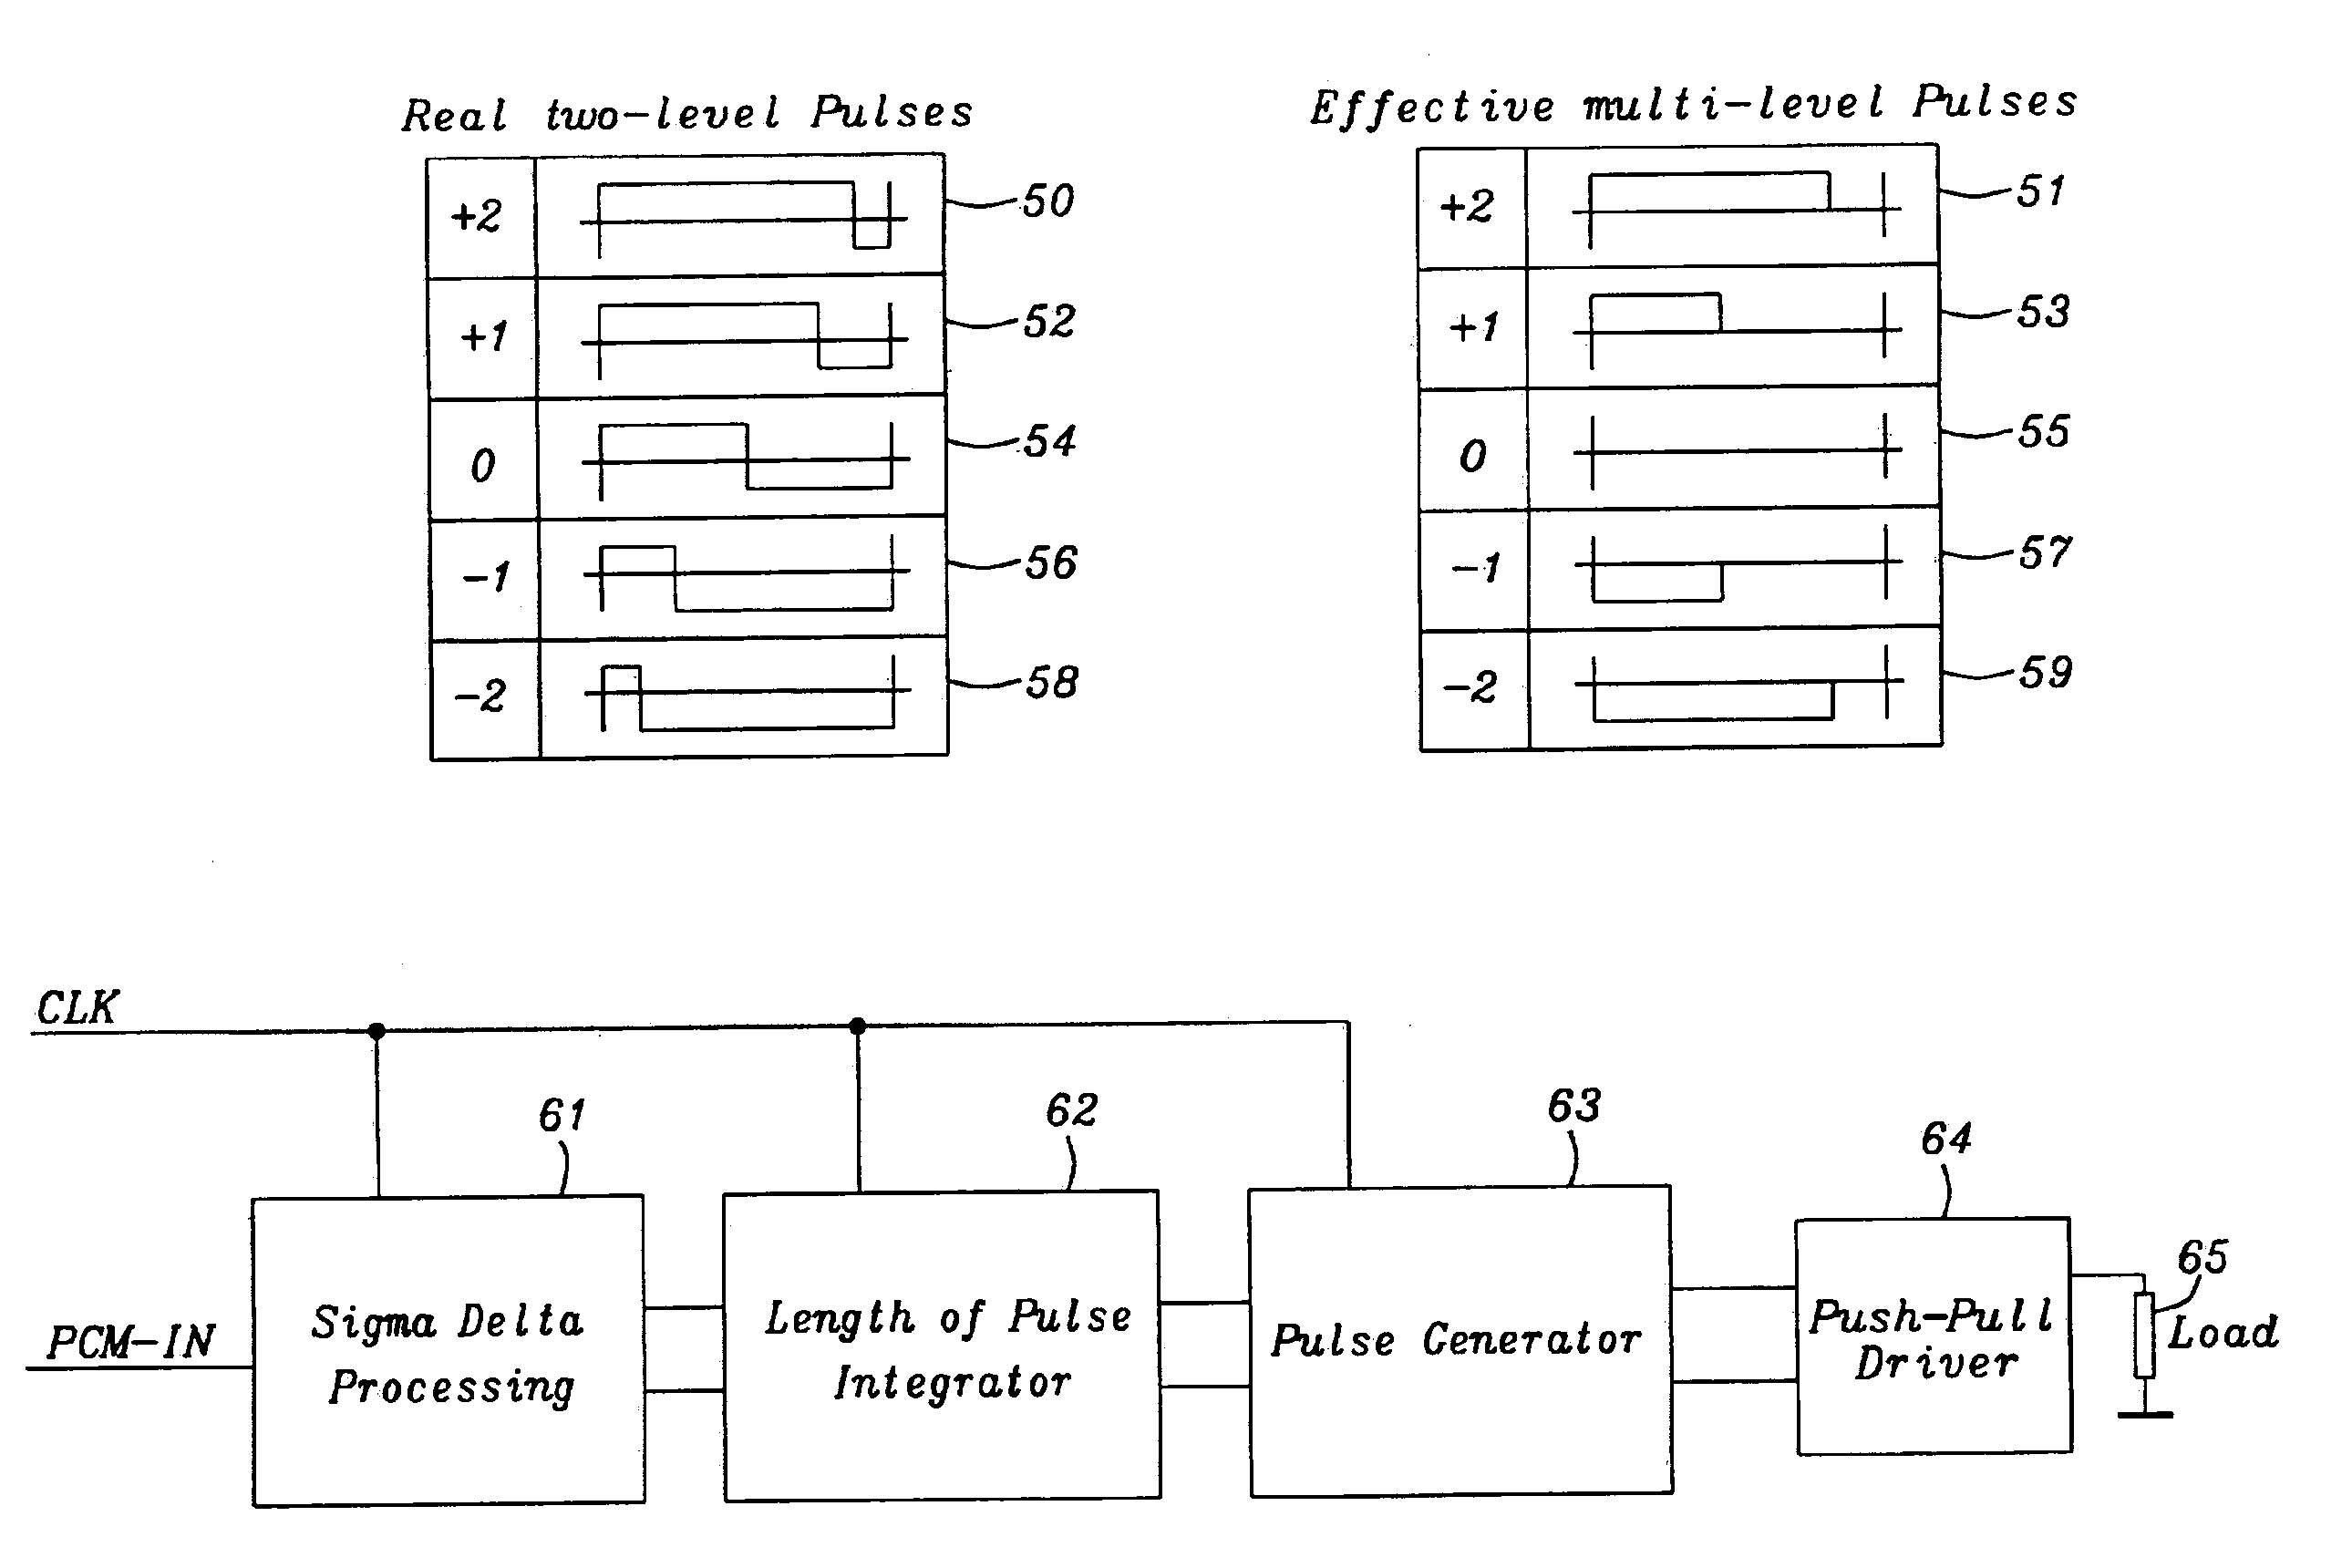 Multi-level Class-D amplifier by means of 2 physical layers